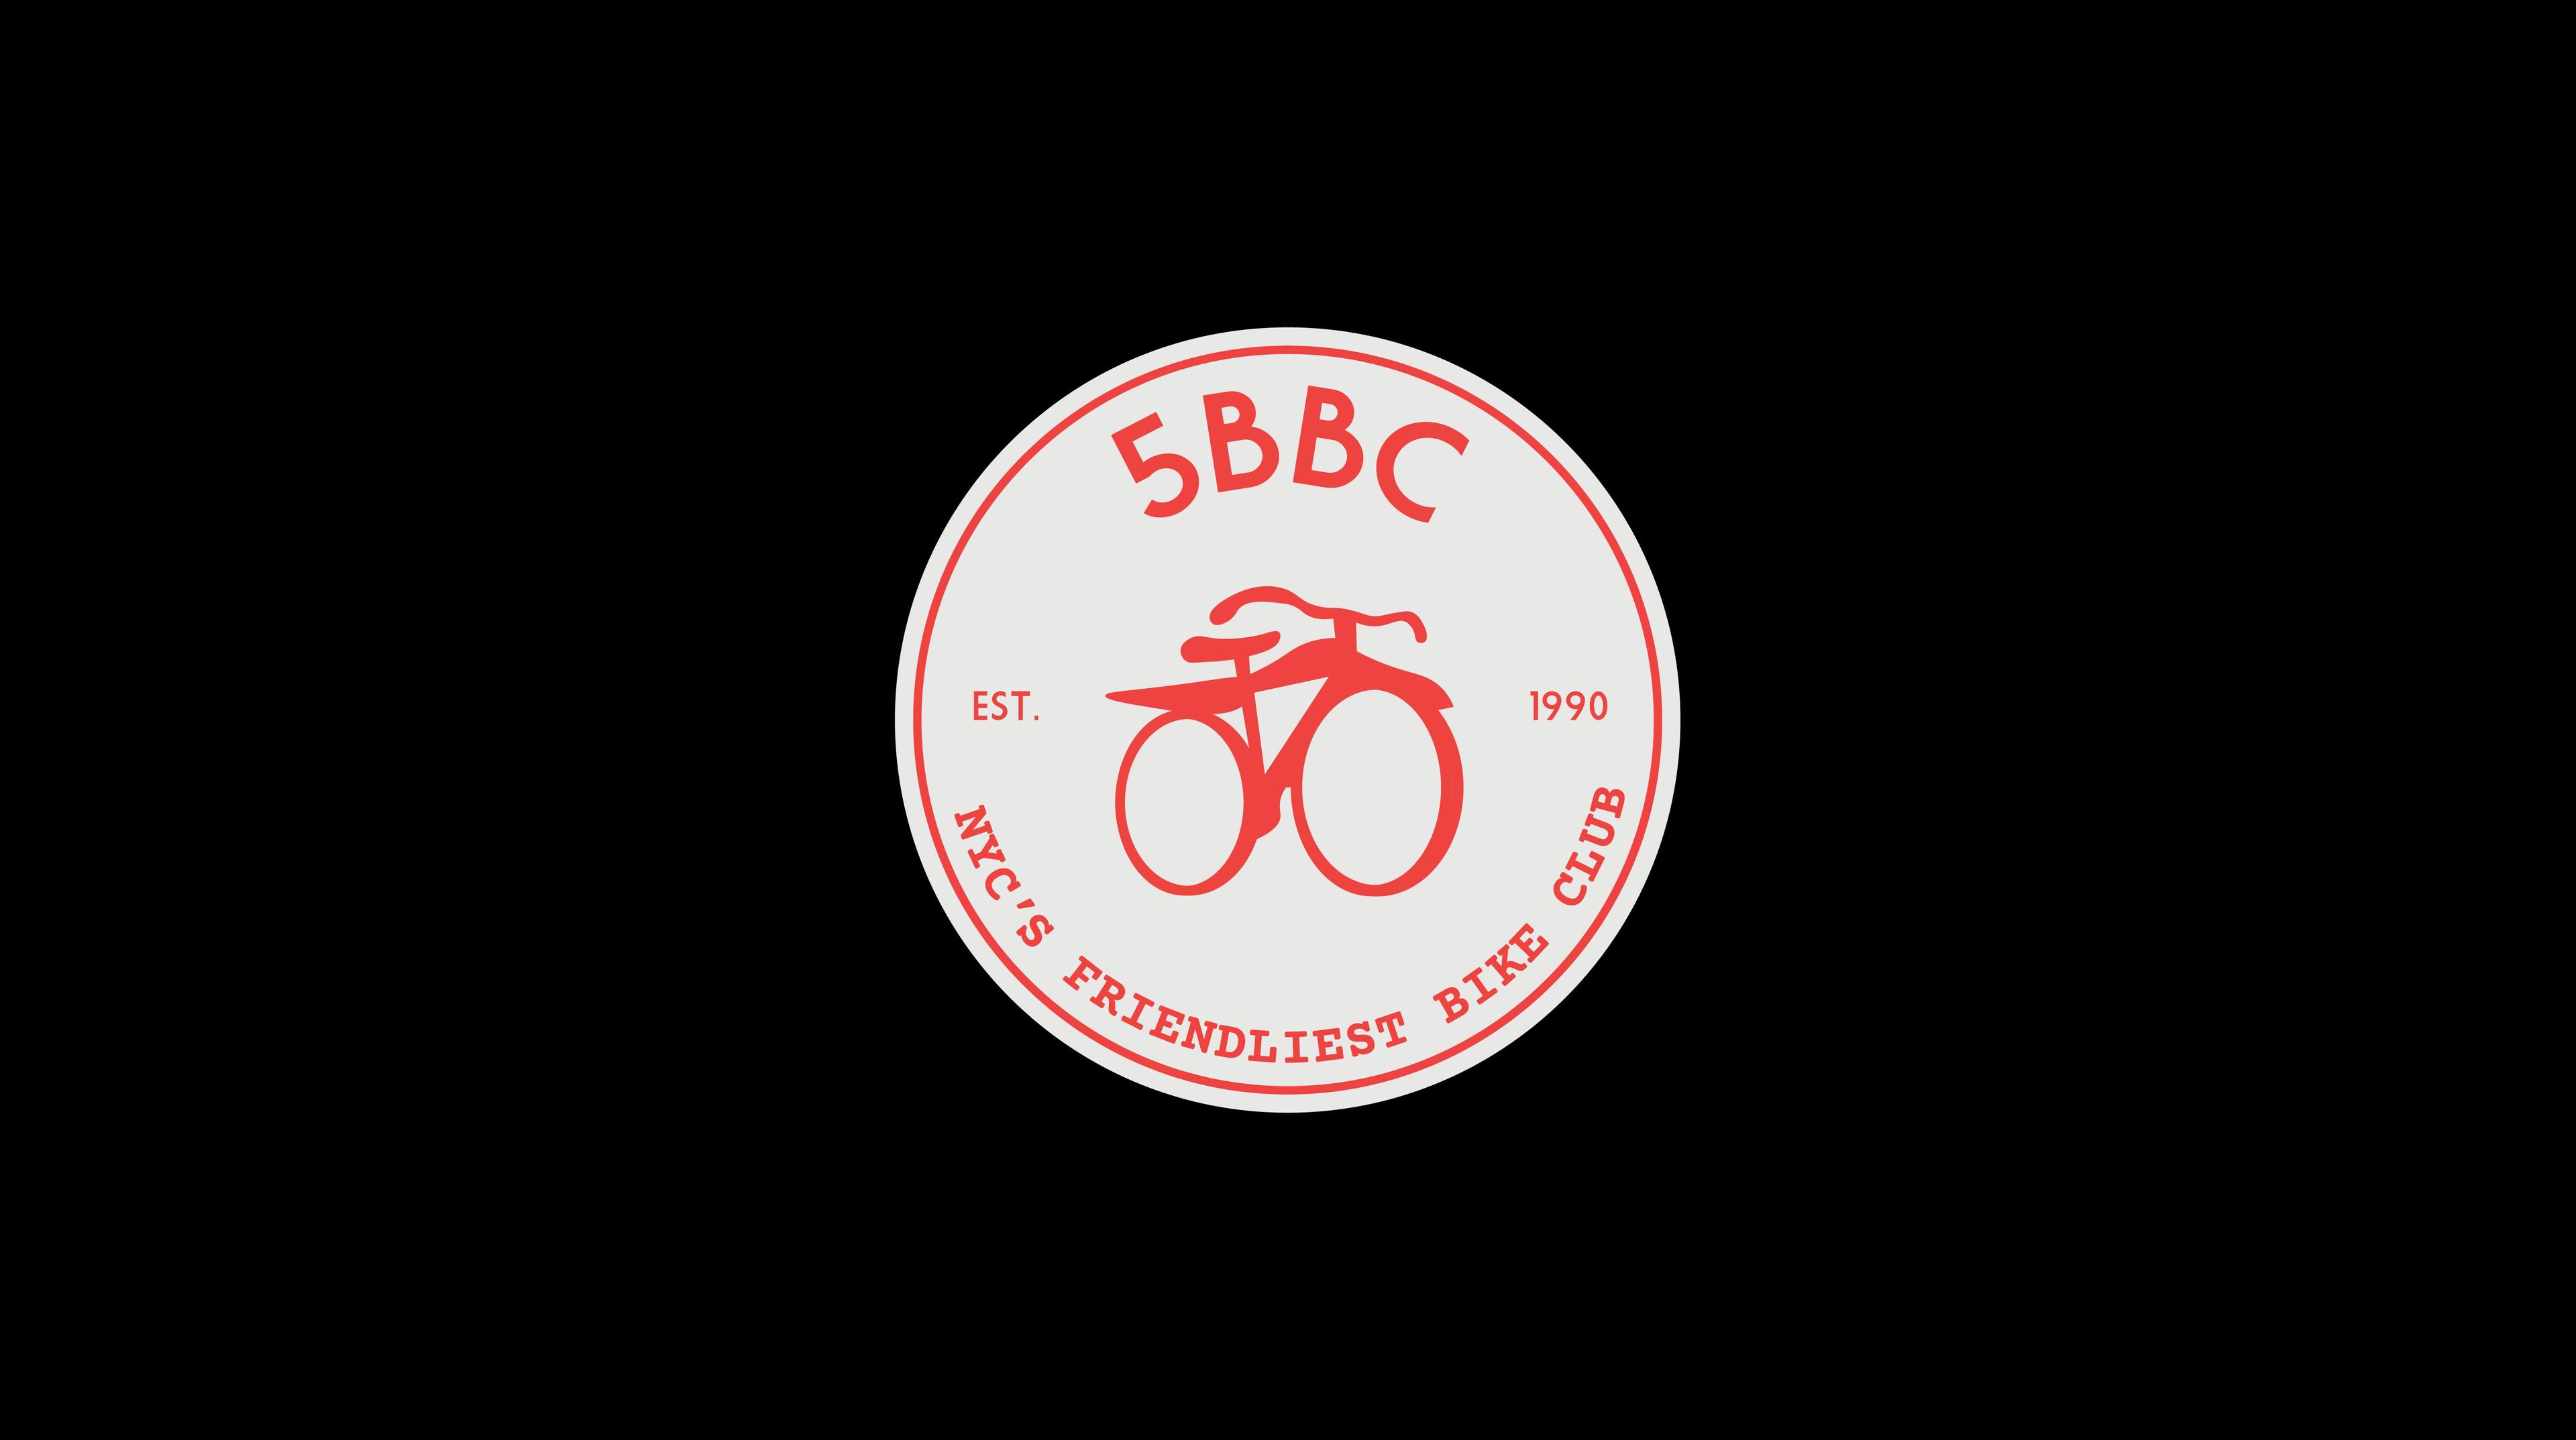 5BBC logo with a red bike on a white background